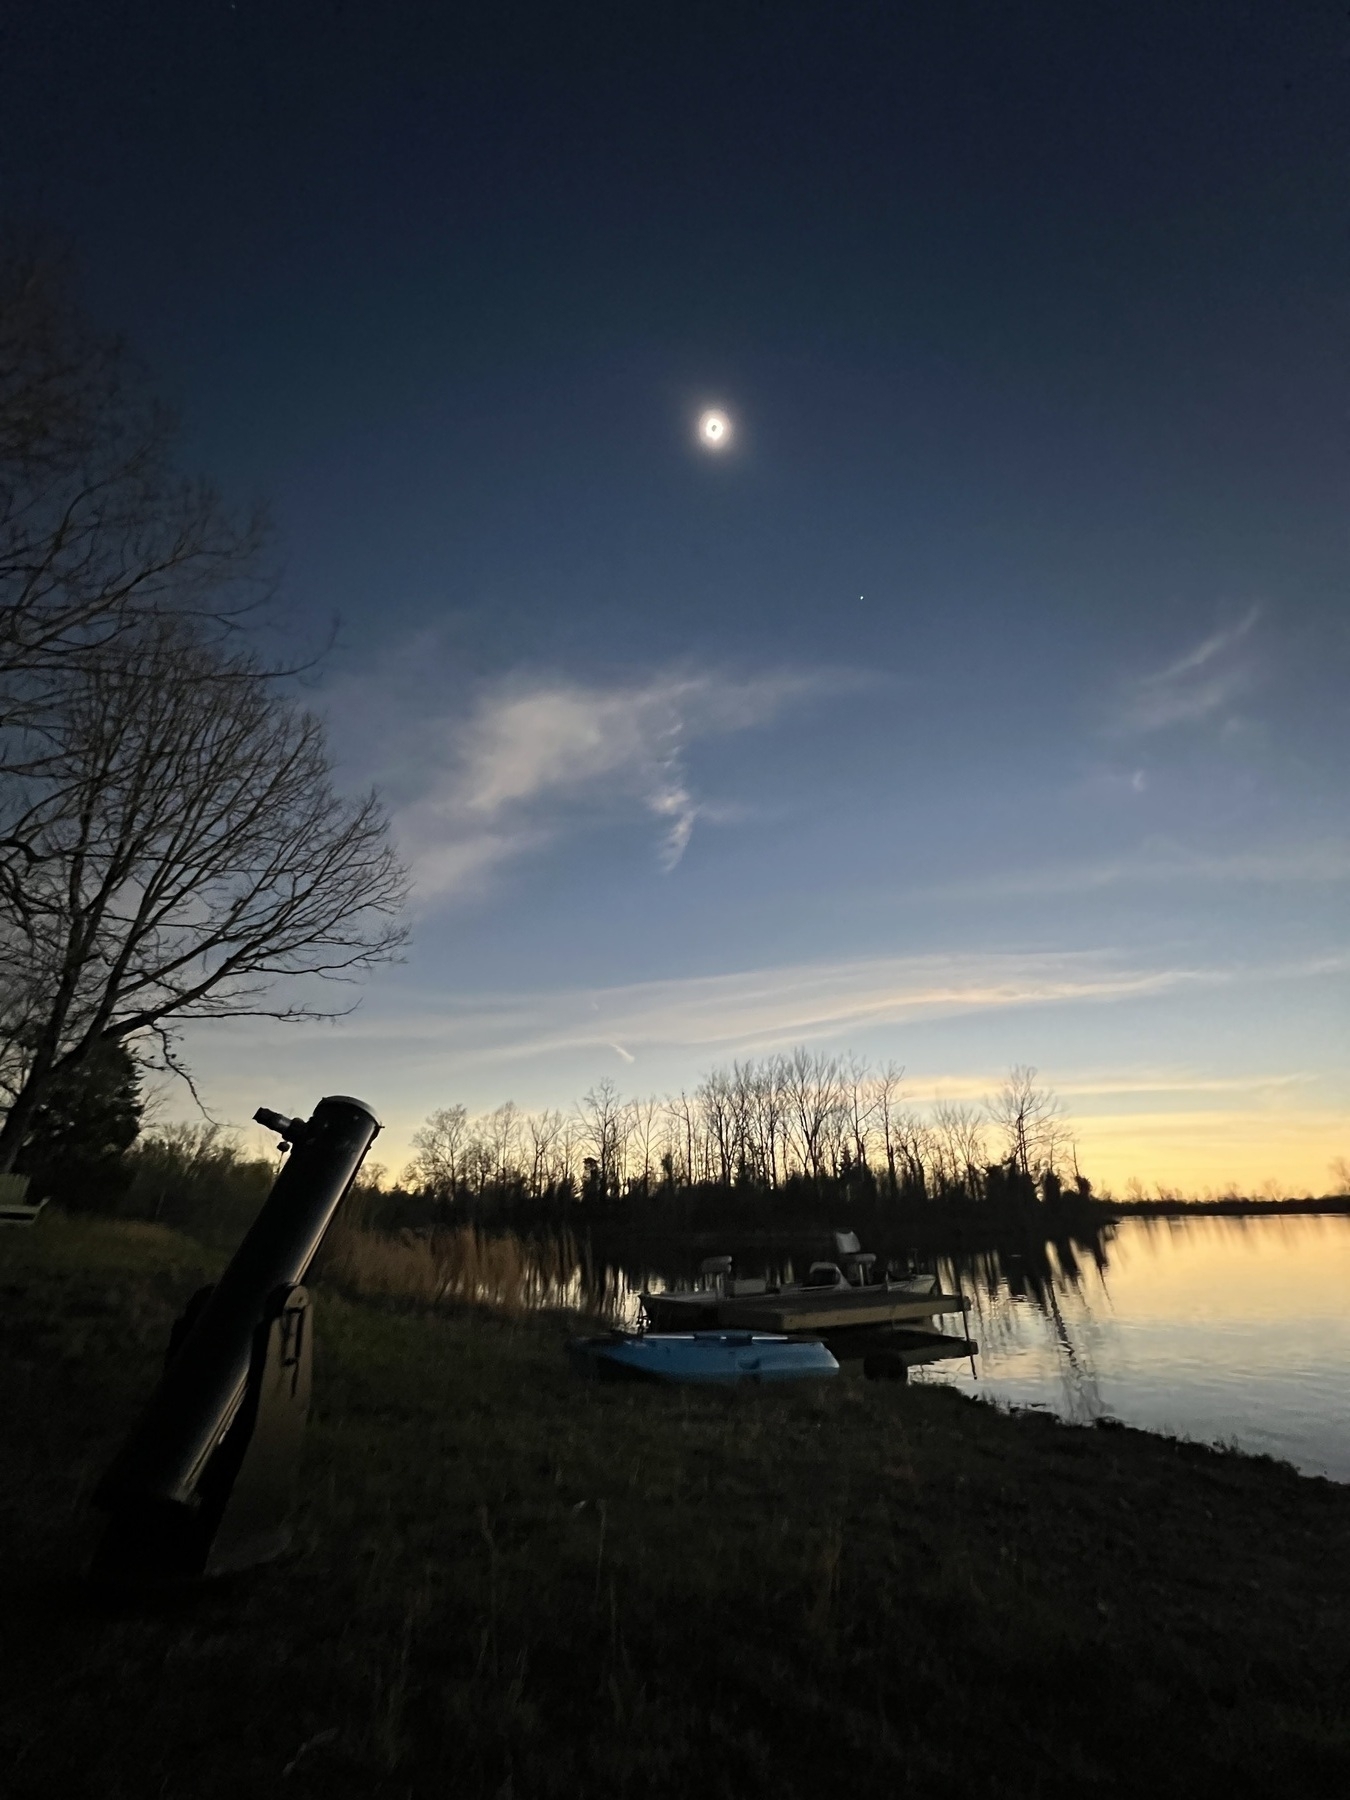 A telescope aimed at Sun in total eclipse with a lake